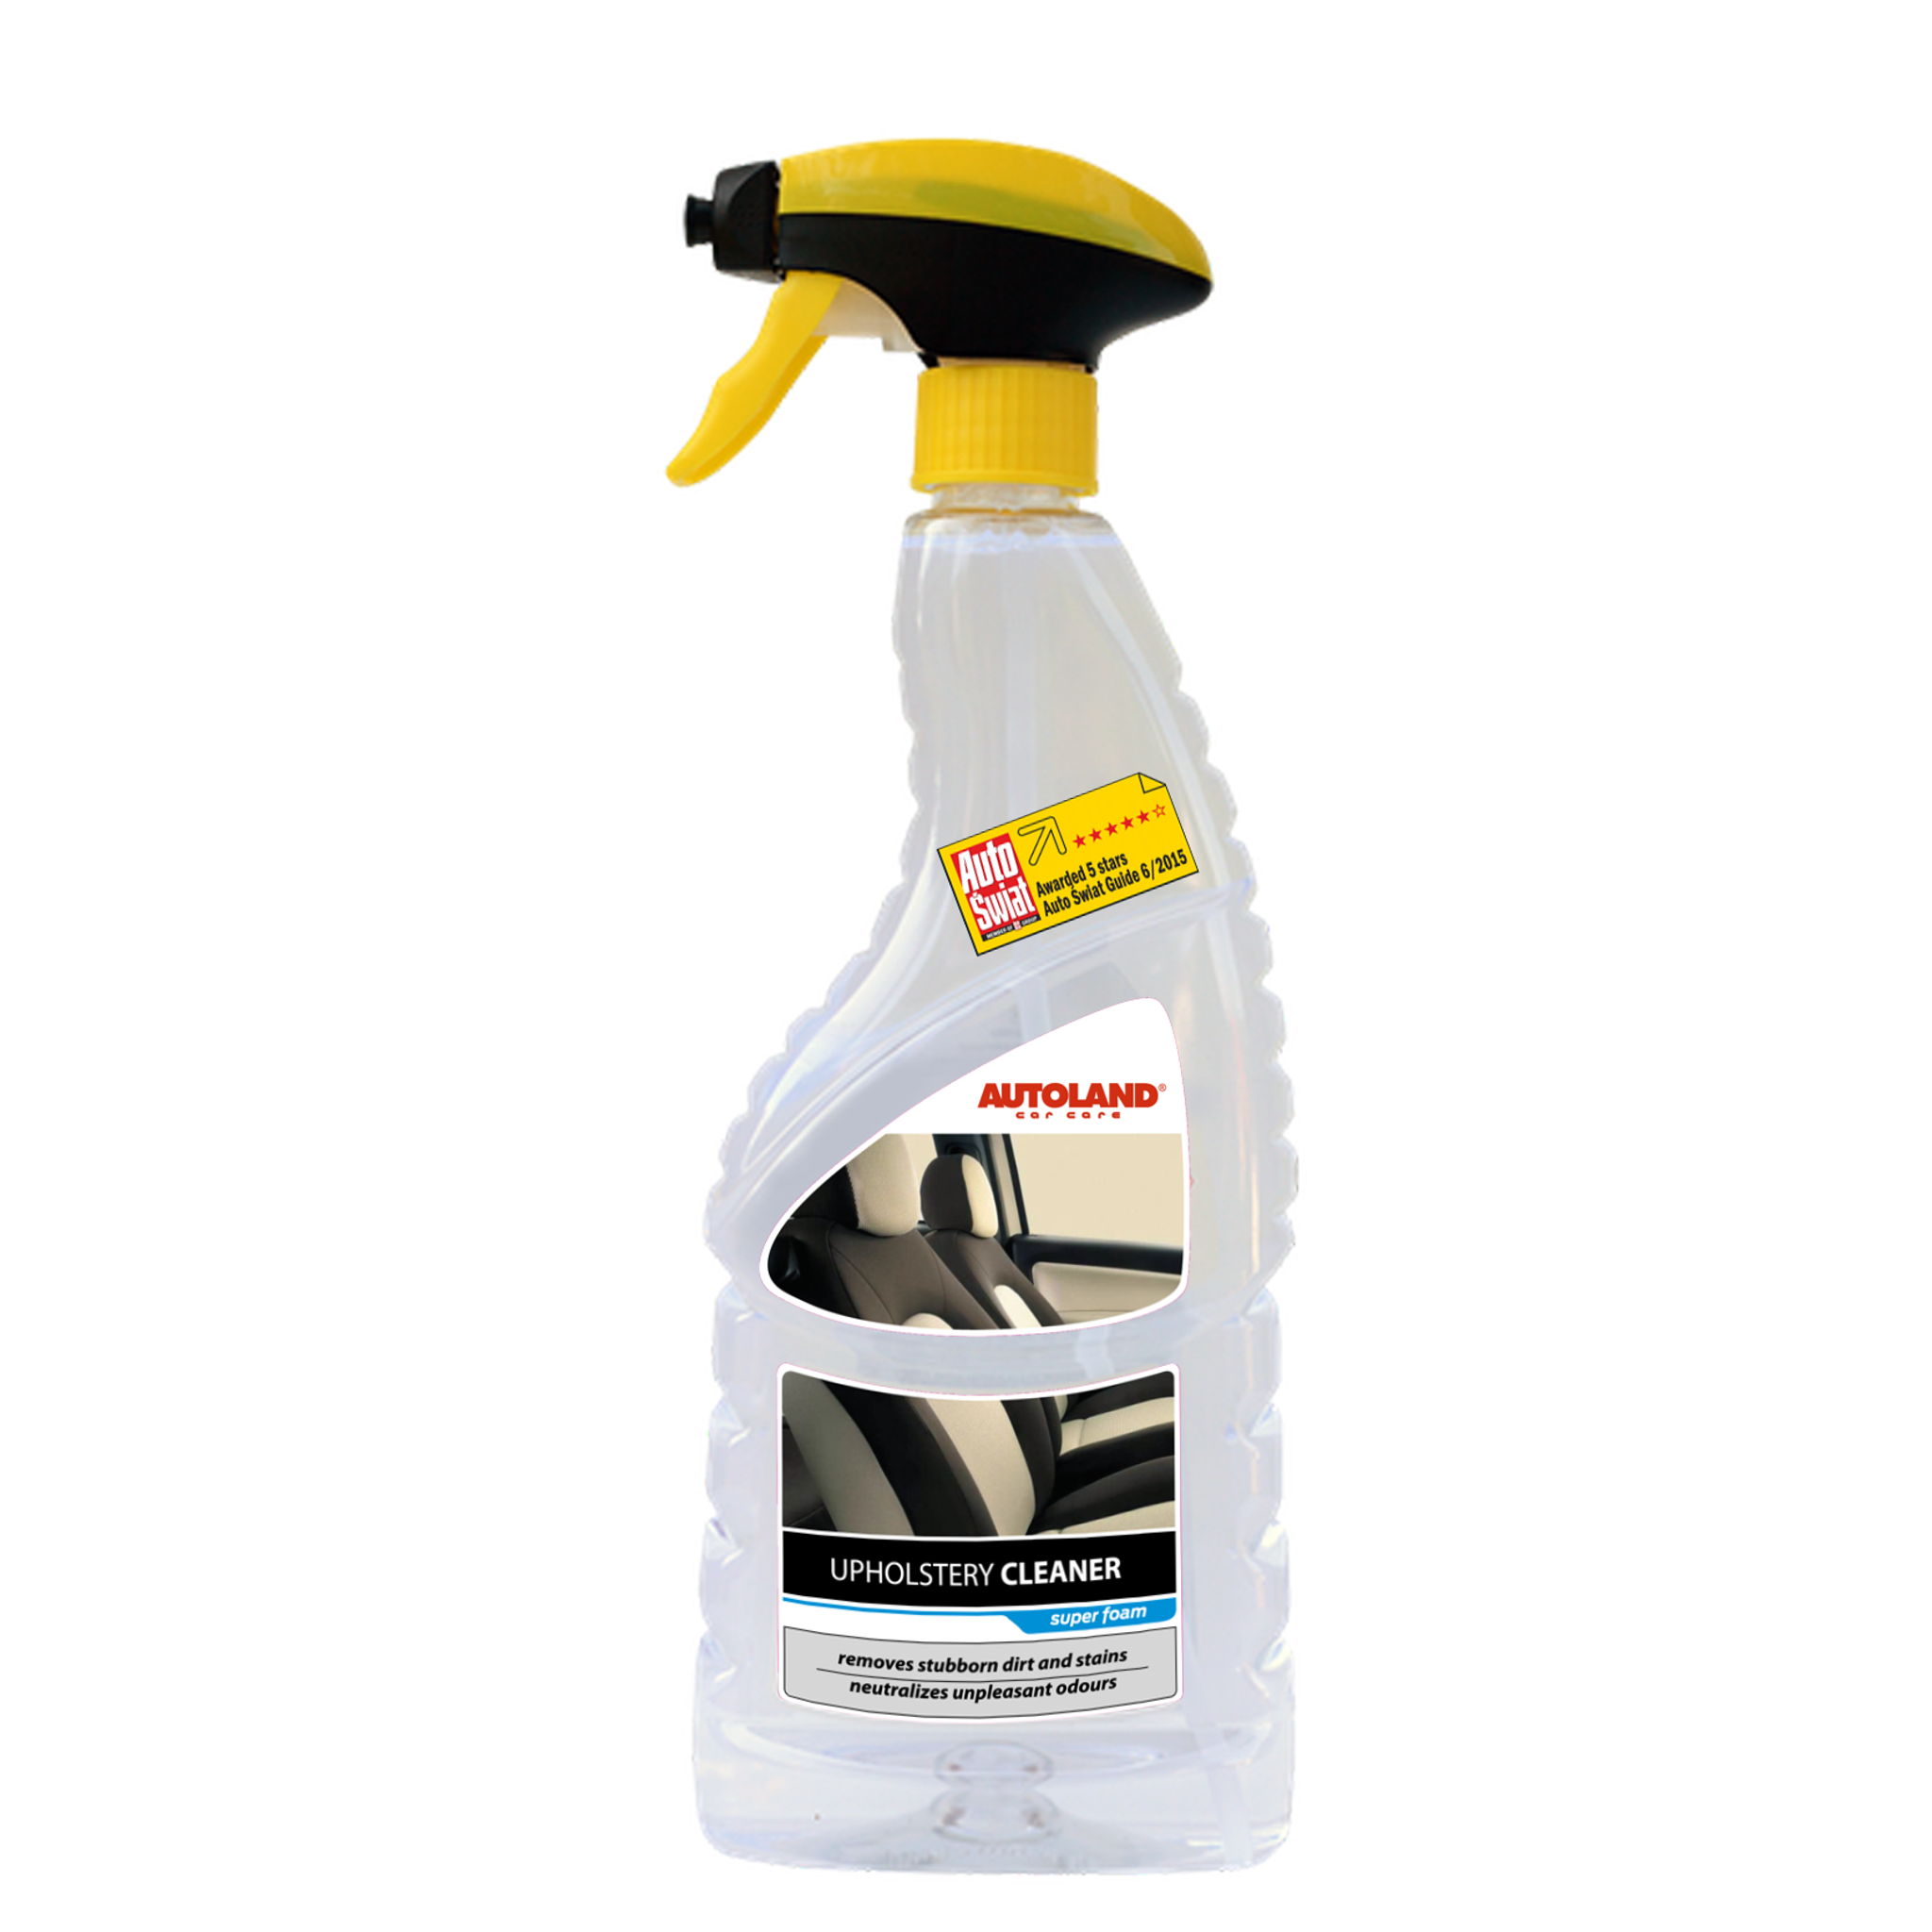 FOAMING UPHOLSTERY CLEANER